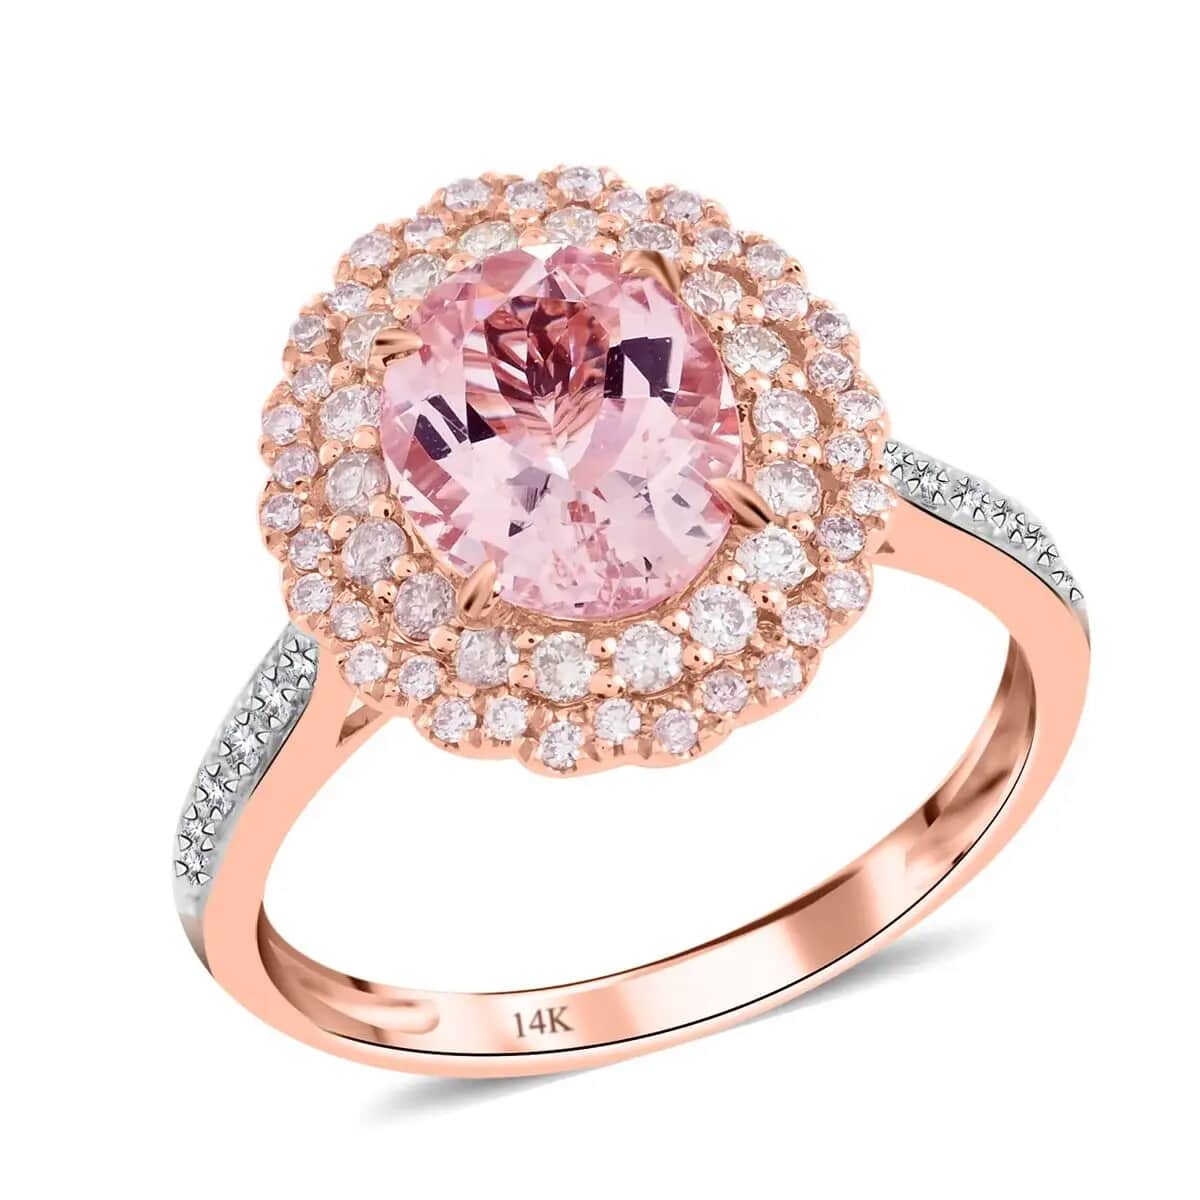 Ankur Treasure Chest Modani Marropino Morganite Ring, 14K Rose Gold Ring, Diamond Floral Halo Ring, Natural Pink And White Diamond Accent Ring, Promise Rings 1.95 ctw (Size 5.0) image number 0